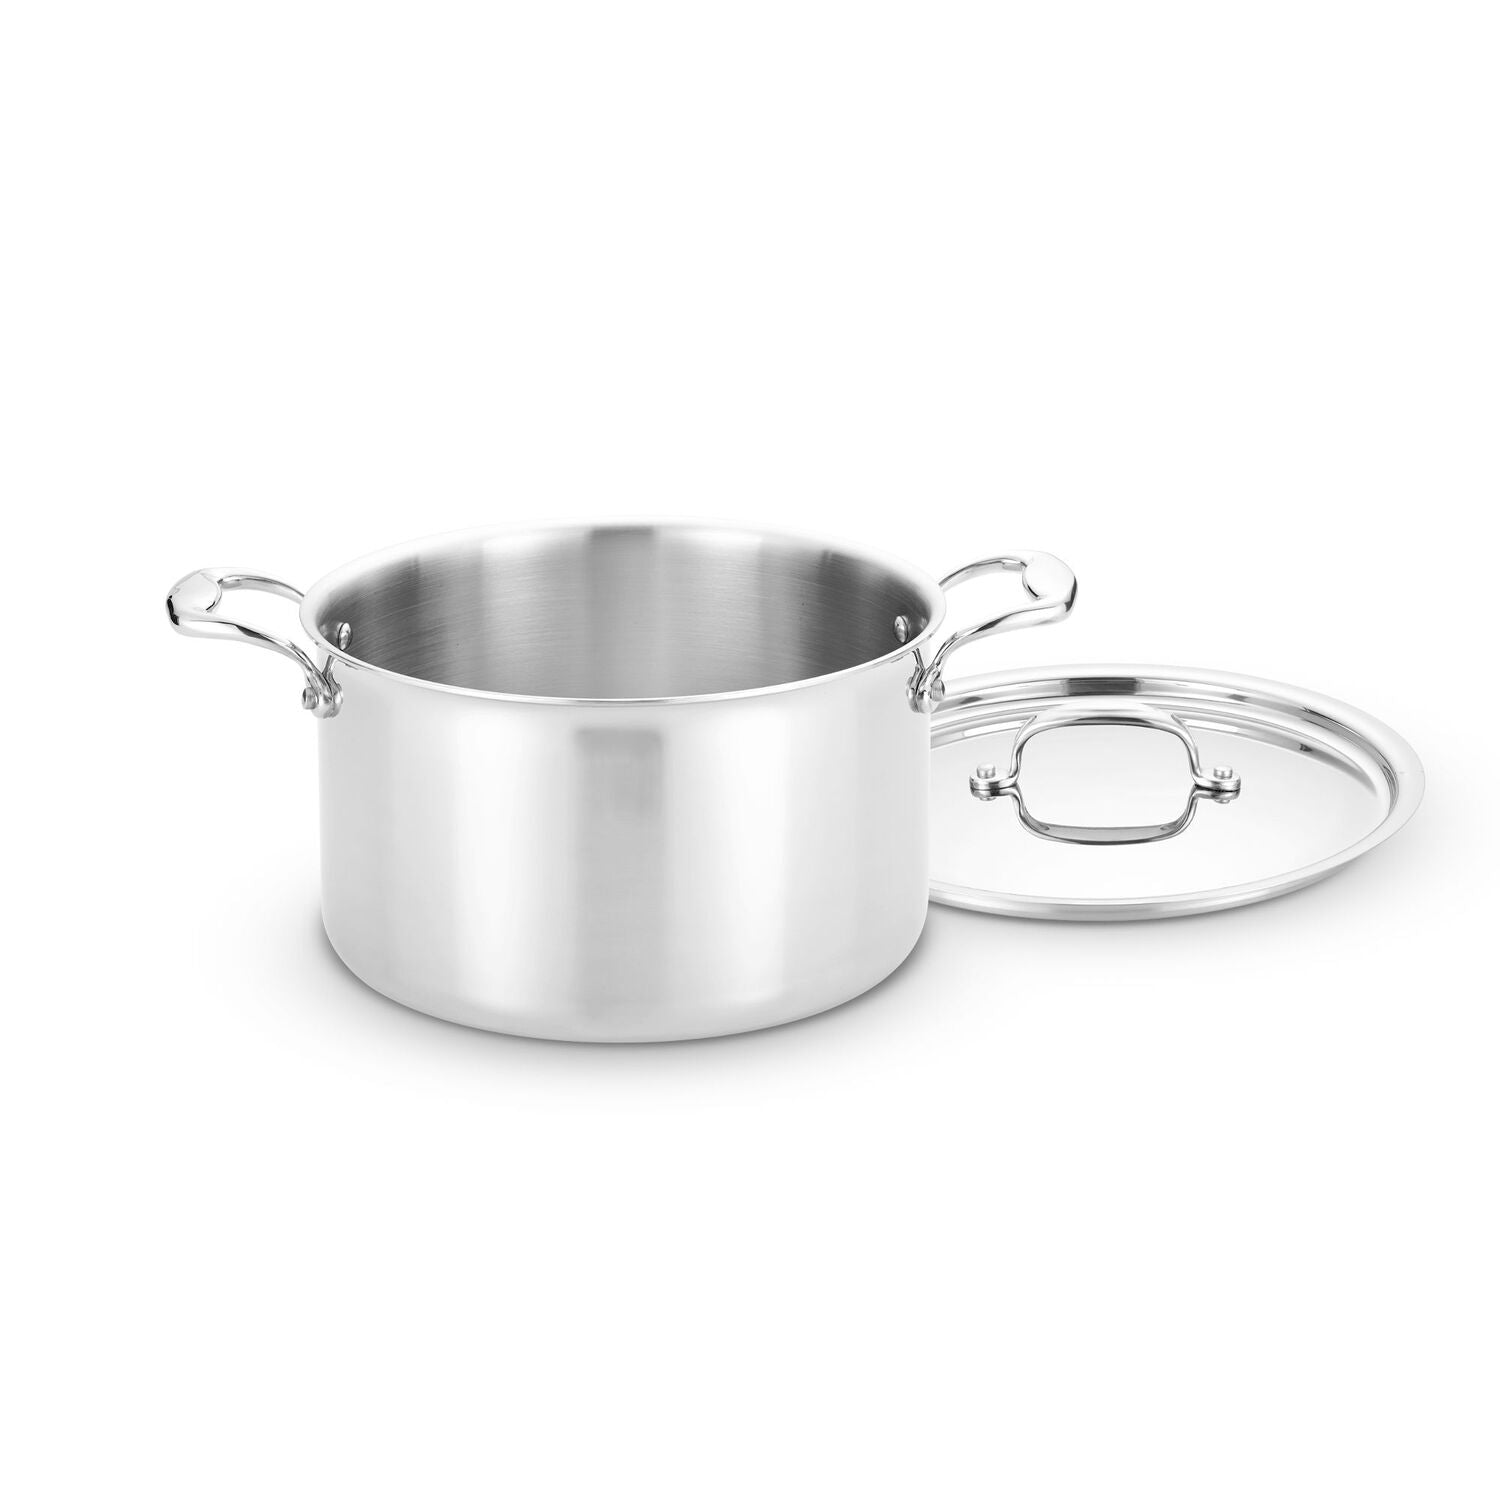 Tramontina Gourmet Tri-Ply Clad 5 qt Covered Dutch Oven, Stainless Steel